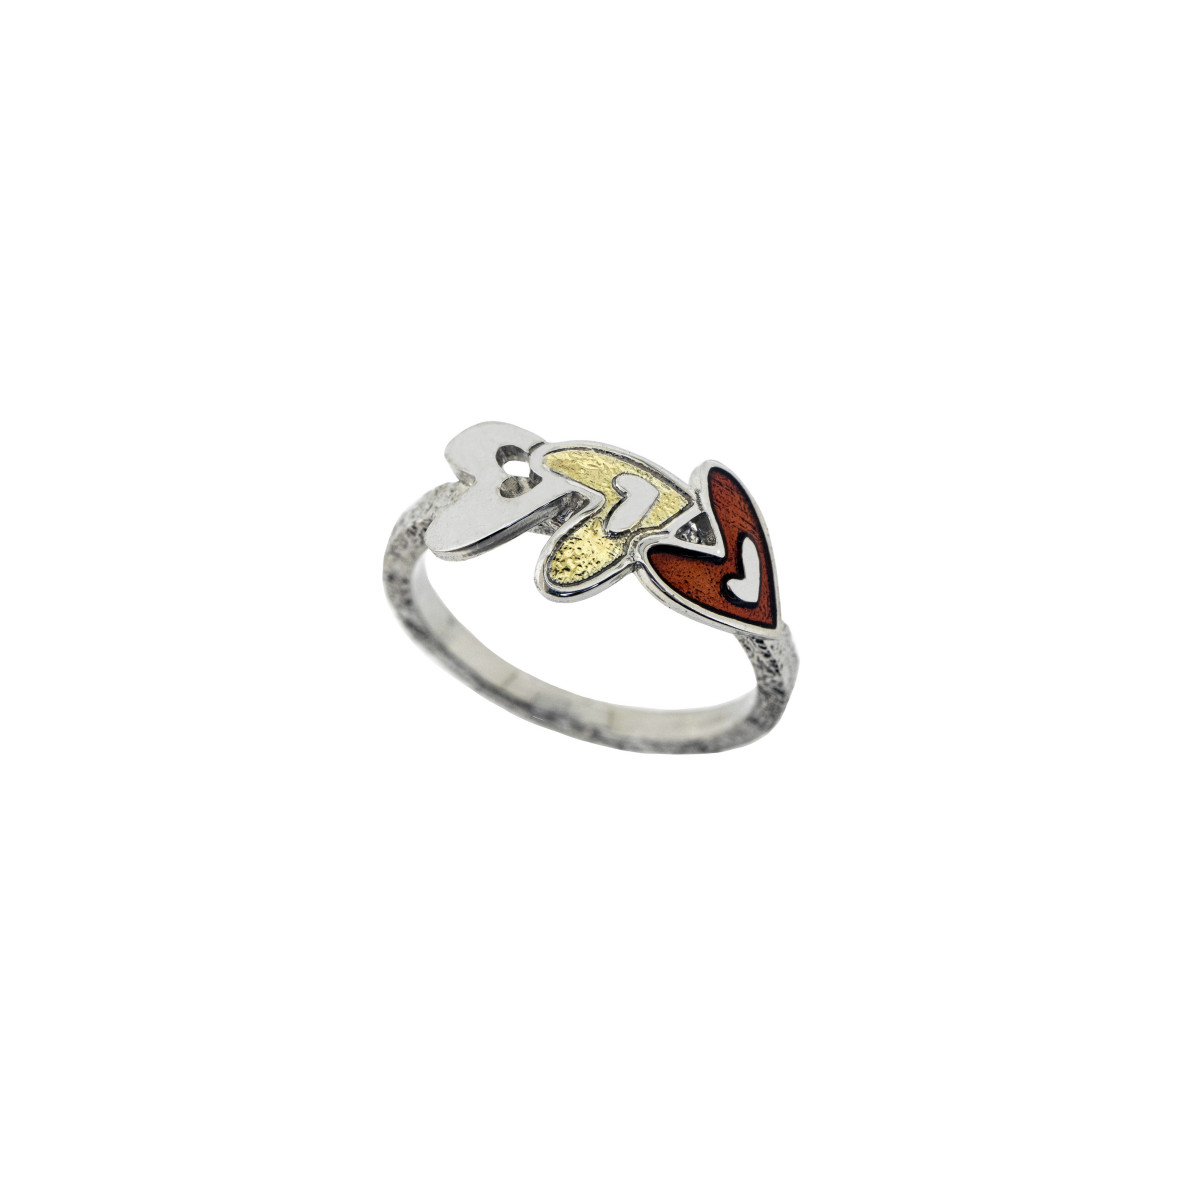 Silver, enamel and gold ring